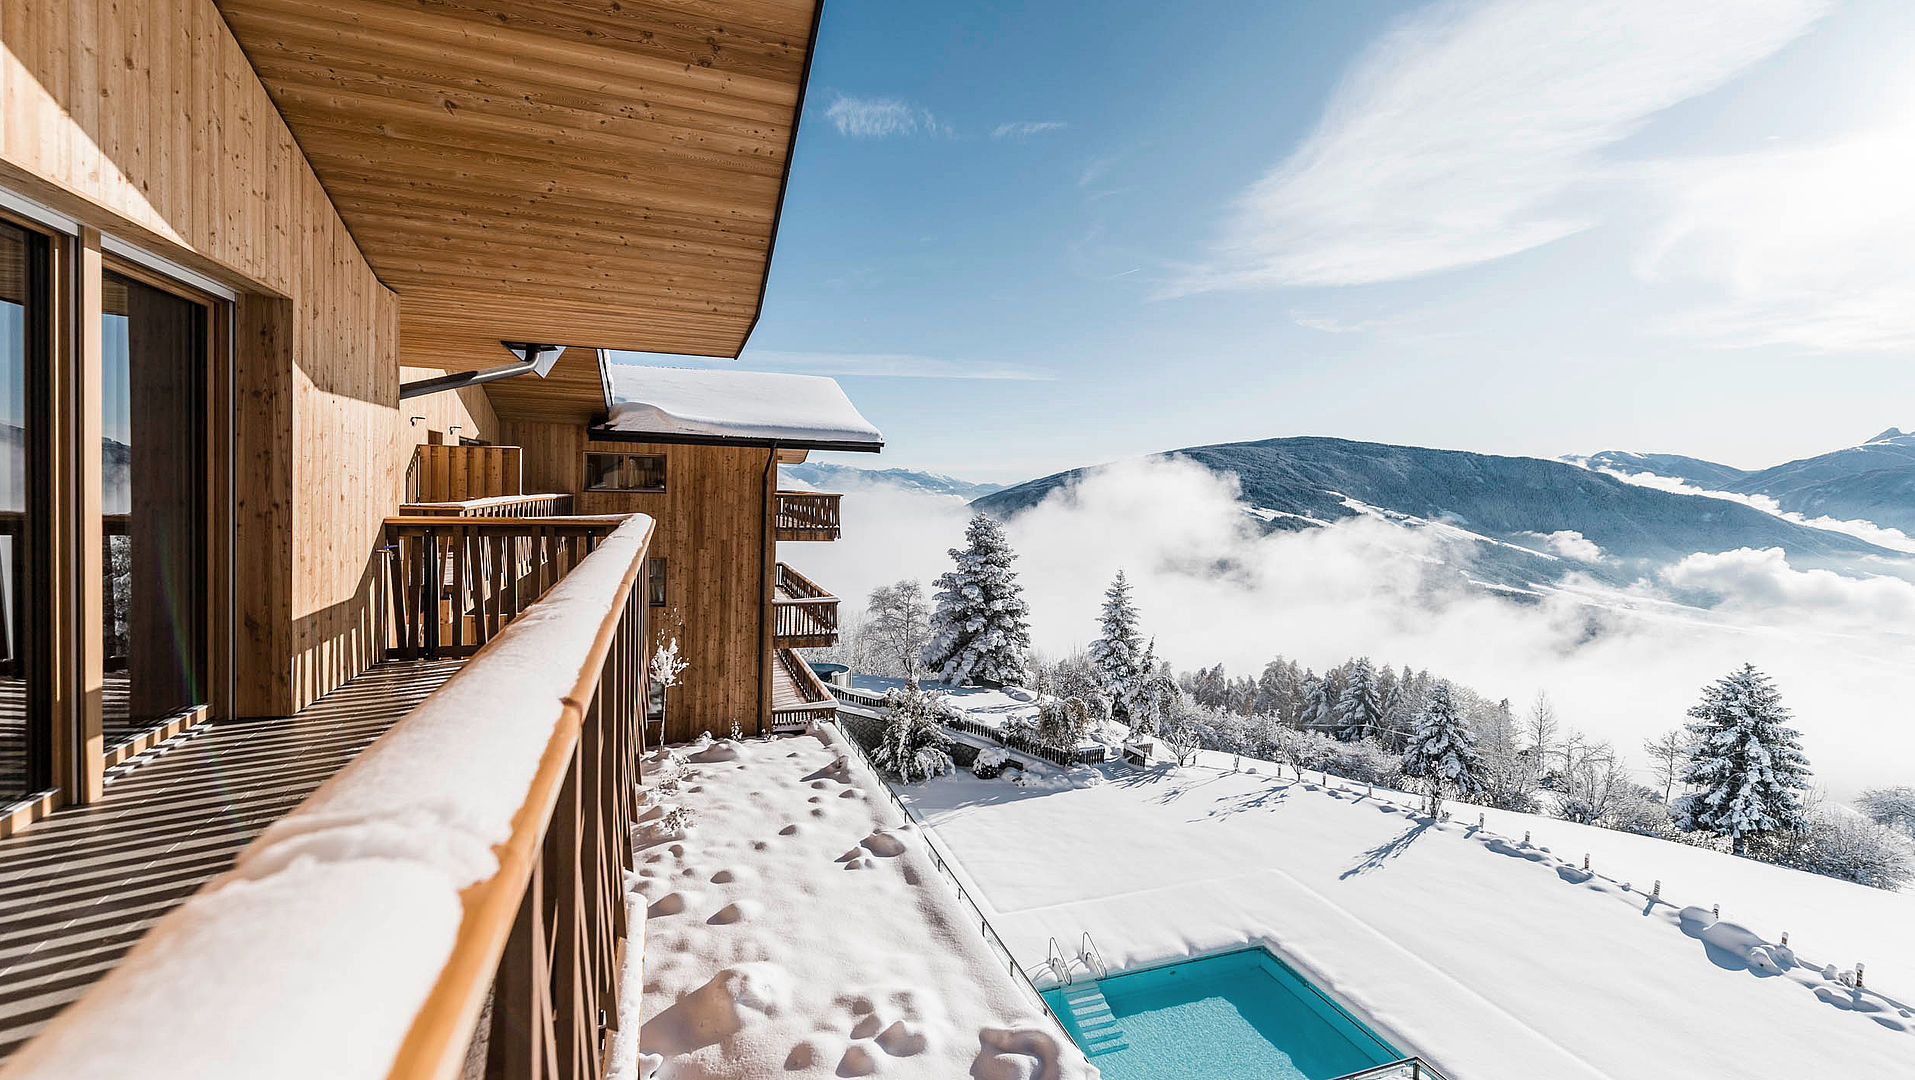 Balcony with view of swimming pool in the snow